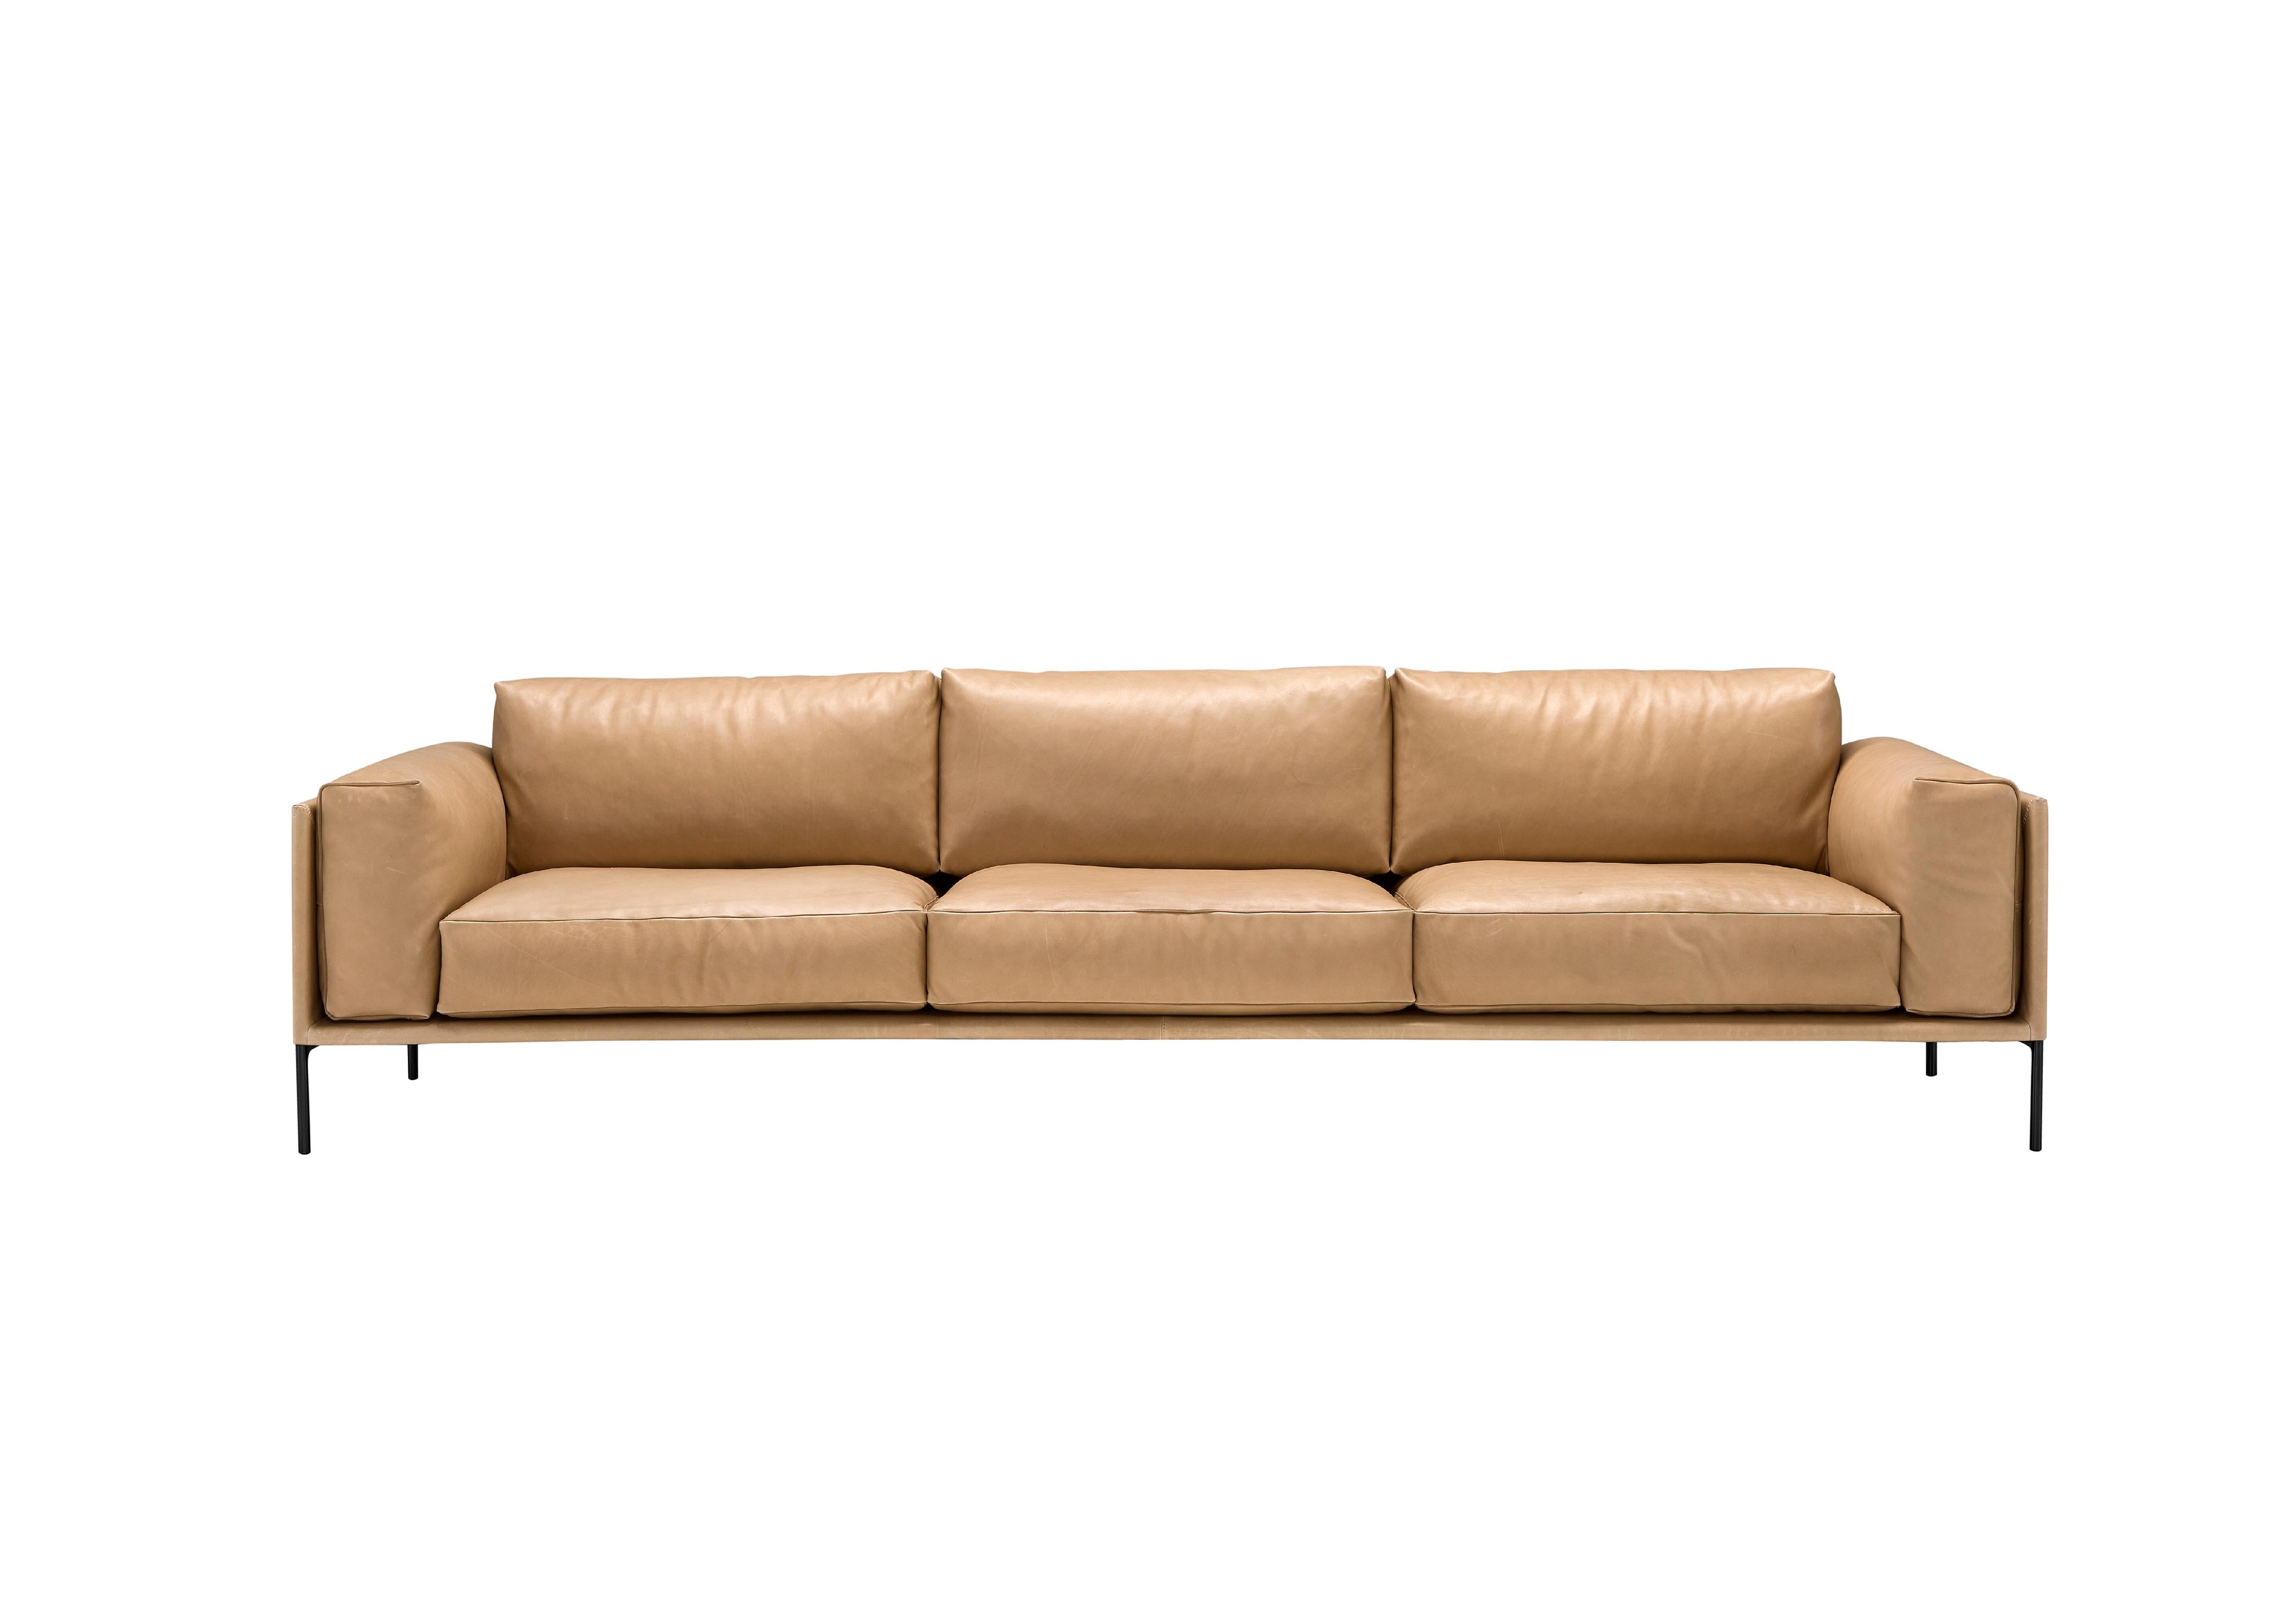 Sofa Giorgio by Amura Lab 
Designer: Emanuel Gargano

Configuration: 421P
Model shown: Leather - Daino 02

“Perfect synthesis of form and function, comfort” A rigid and regular shell, welcomes soft and enveloping seats and backs. Giorgio has the